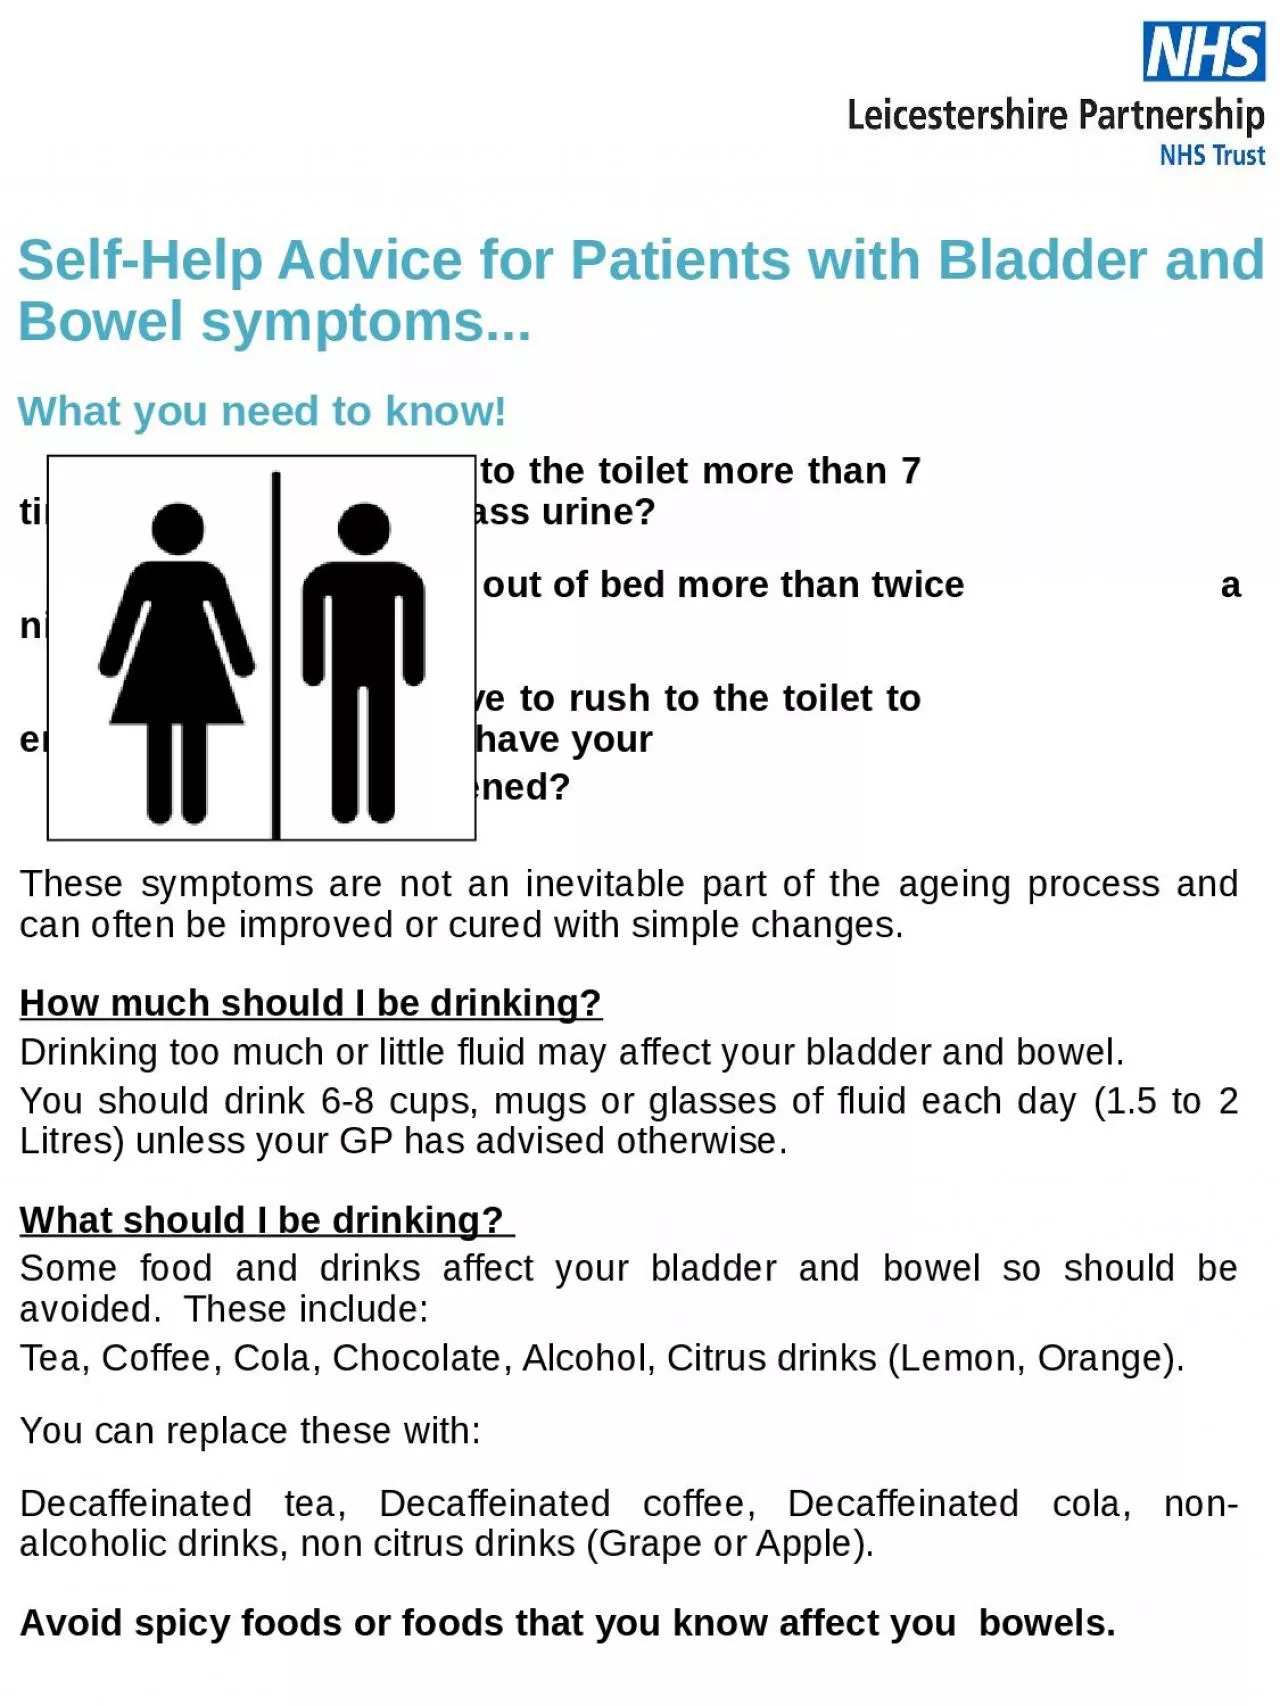 Self-Help Advice for Patients with Bladder and Bowel symptoms...